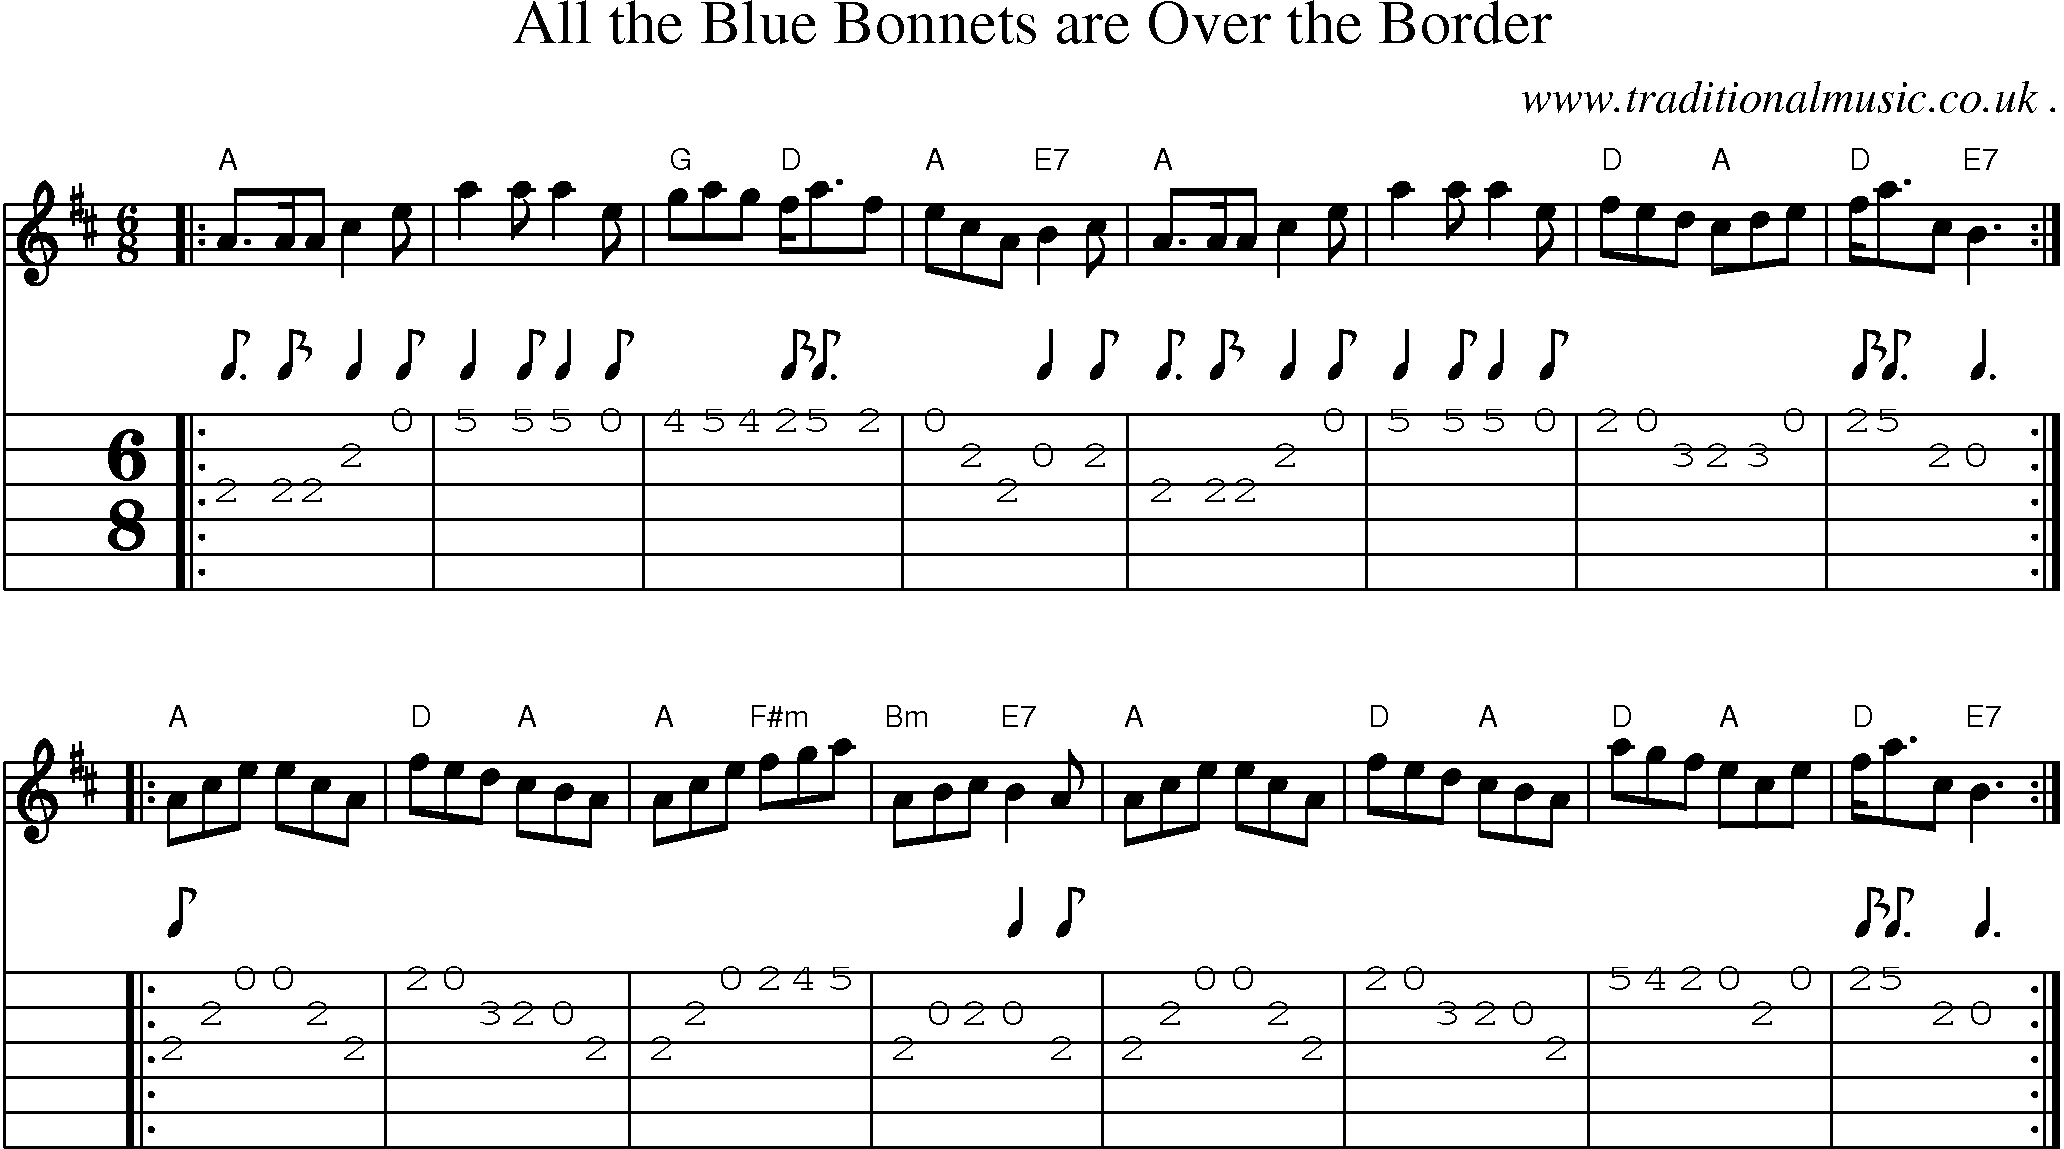 Sheet-music  score, Chords and Guitar Tabs for All The Blue Bonnets Are Over The Border